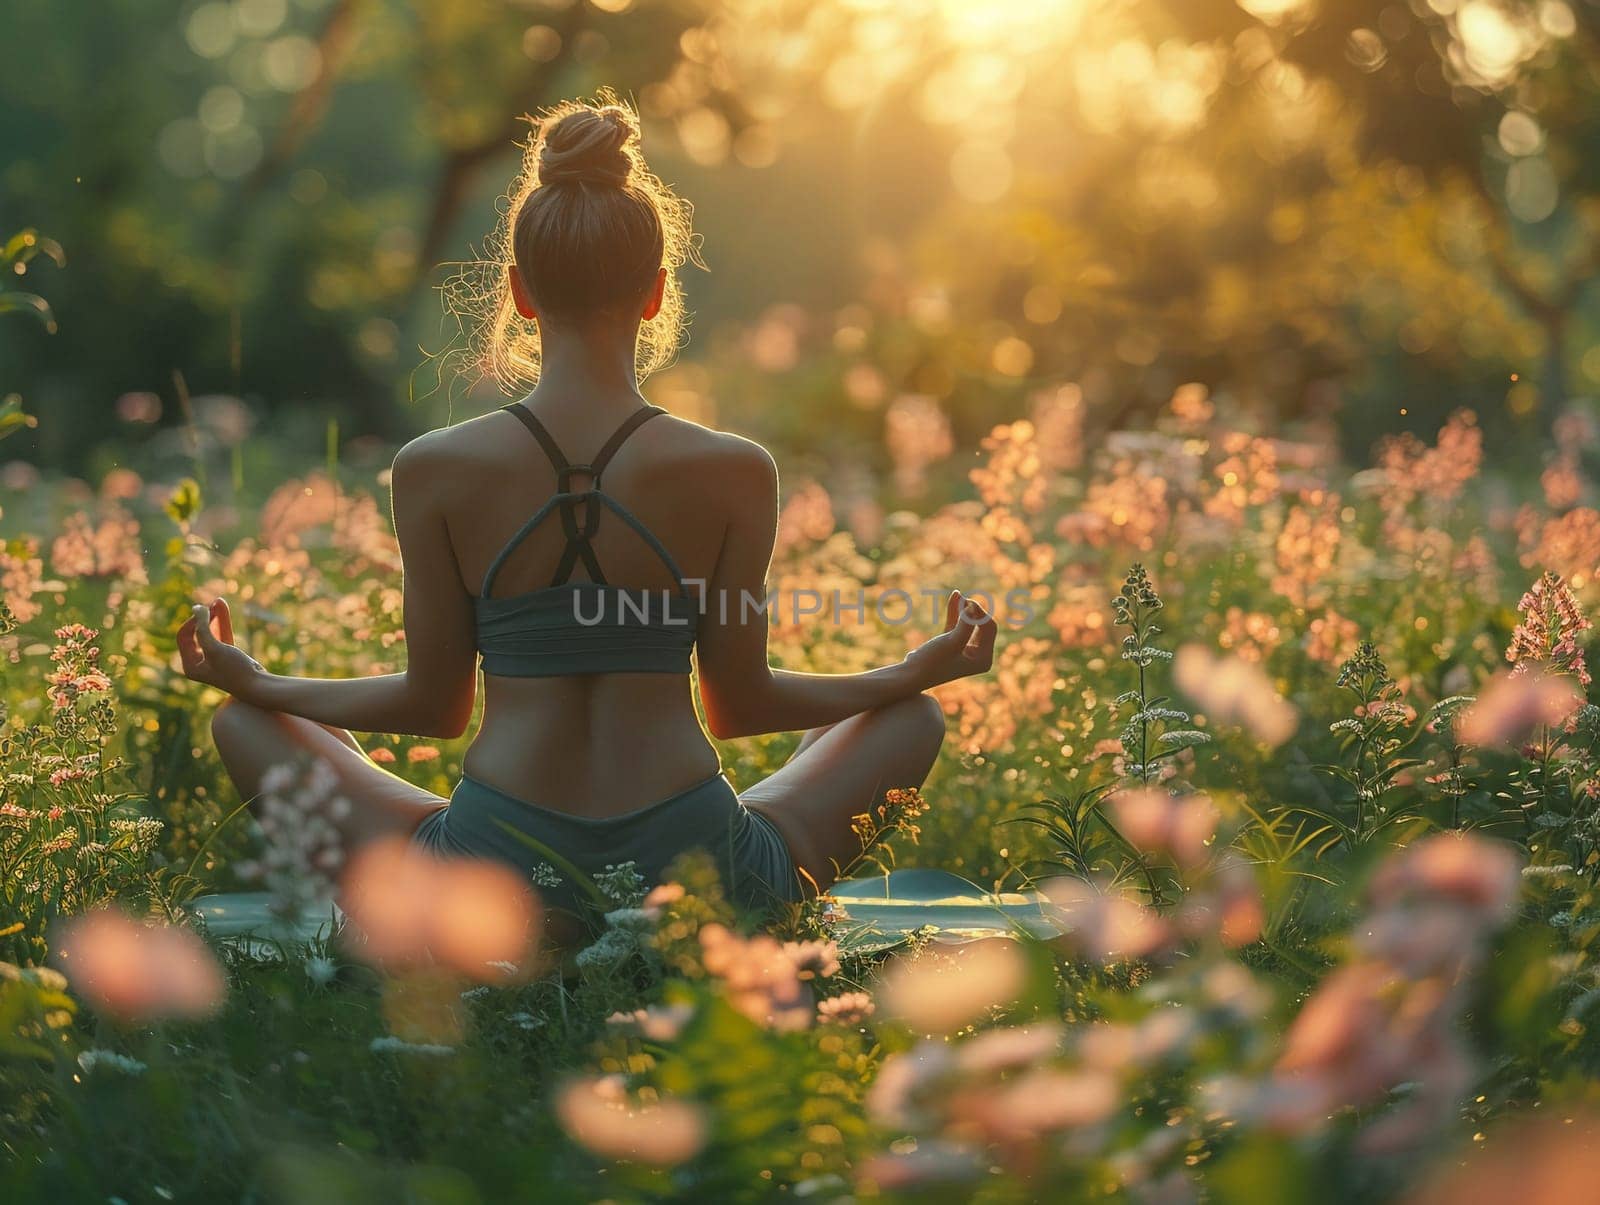 Peaceful Yoga Retreat in Nature with Soft Edges of Serenity, The gentle blend of nature and poses suggests the pursuit of wellness and mindfulness.